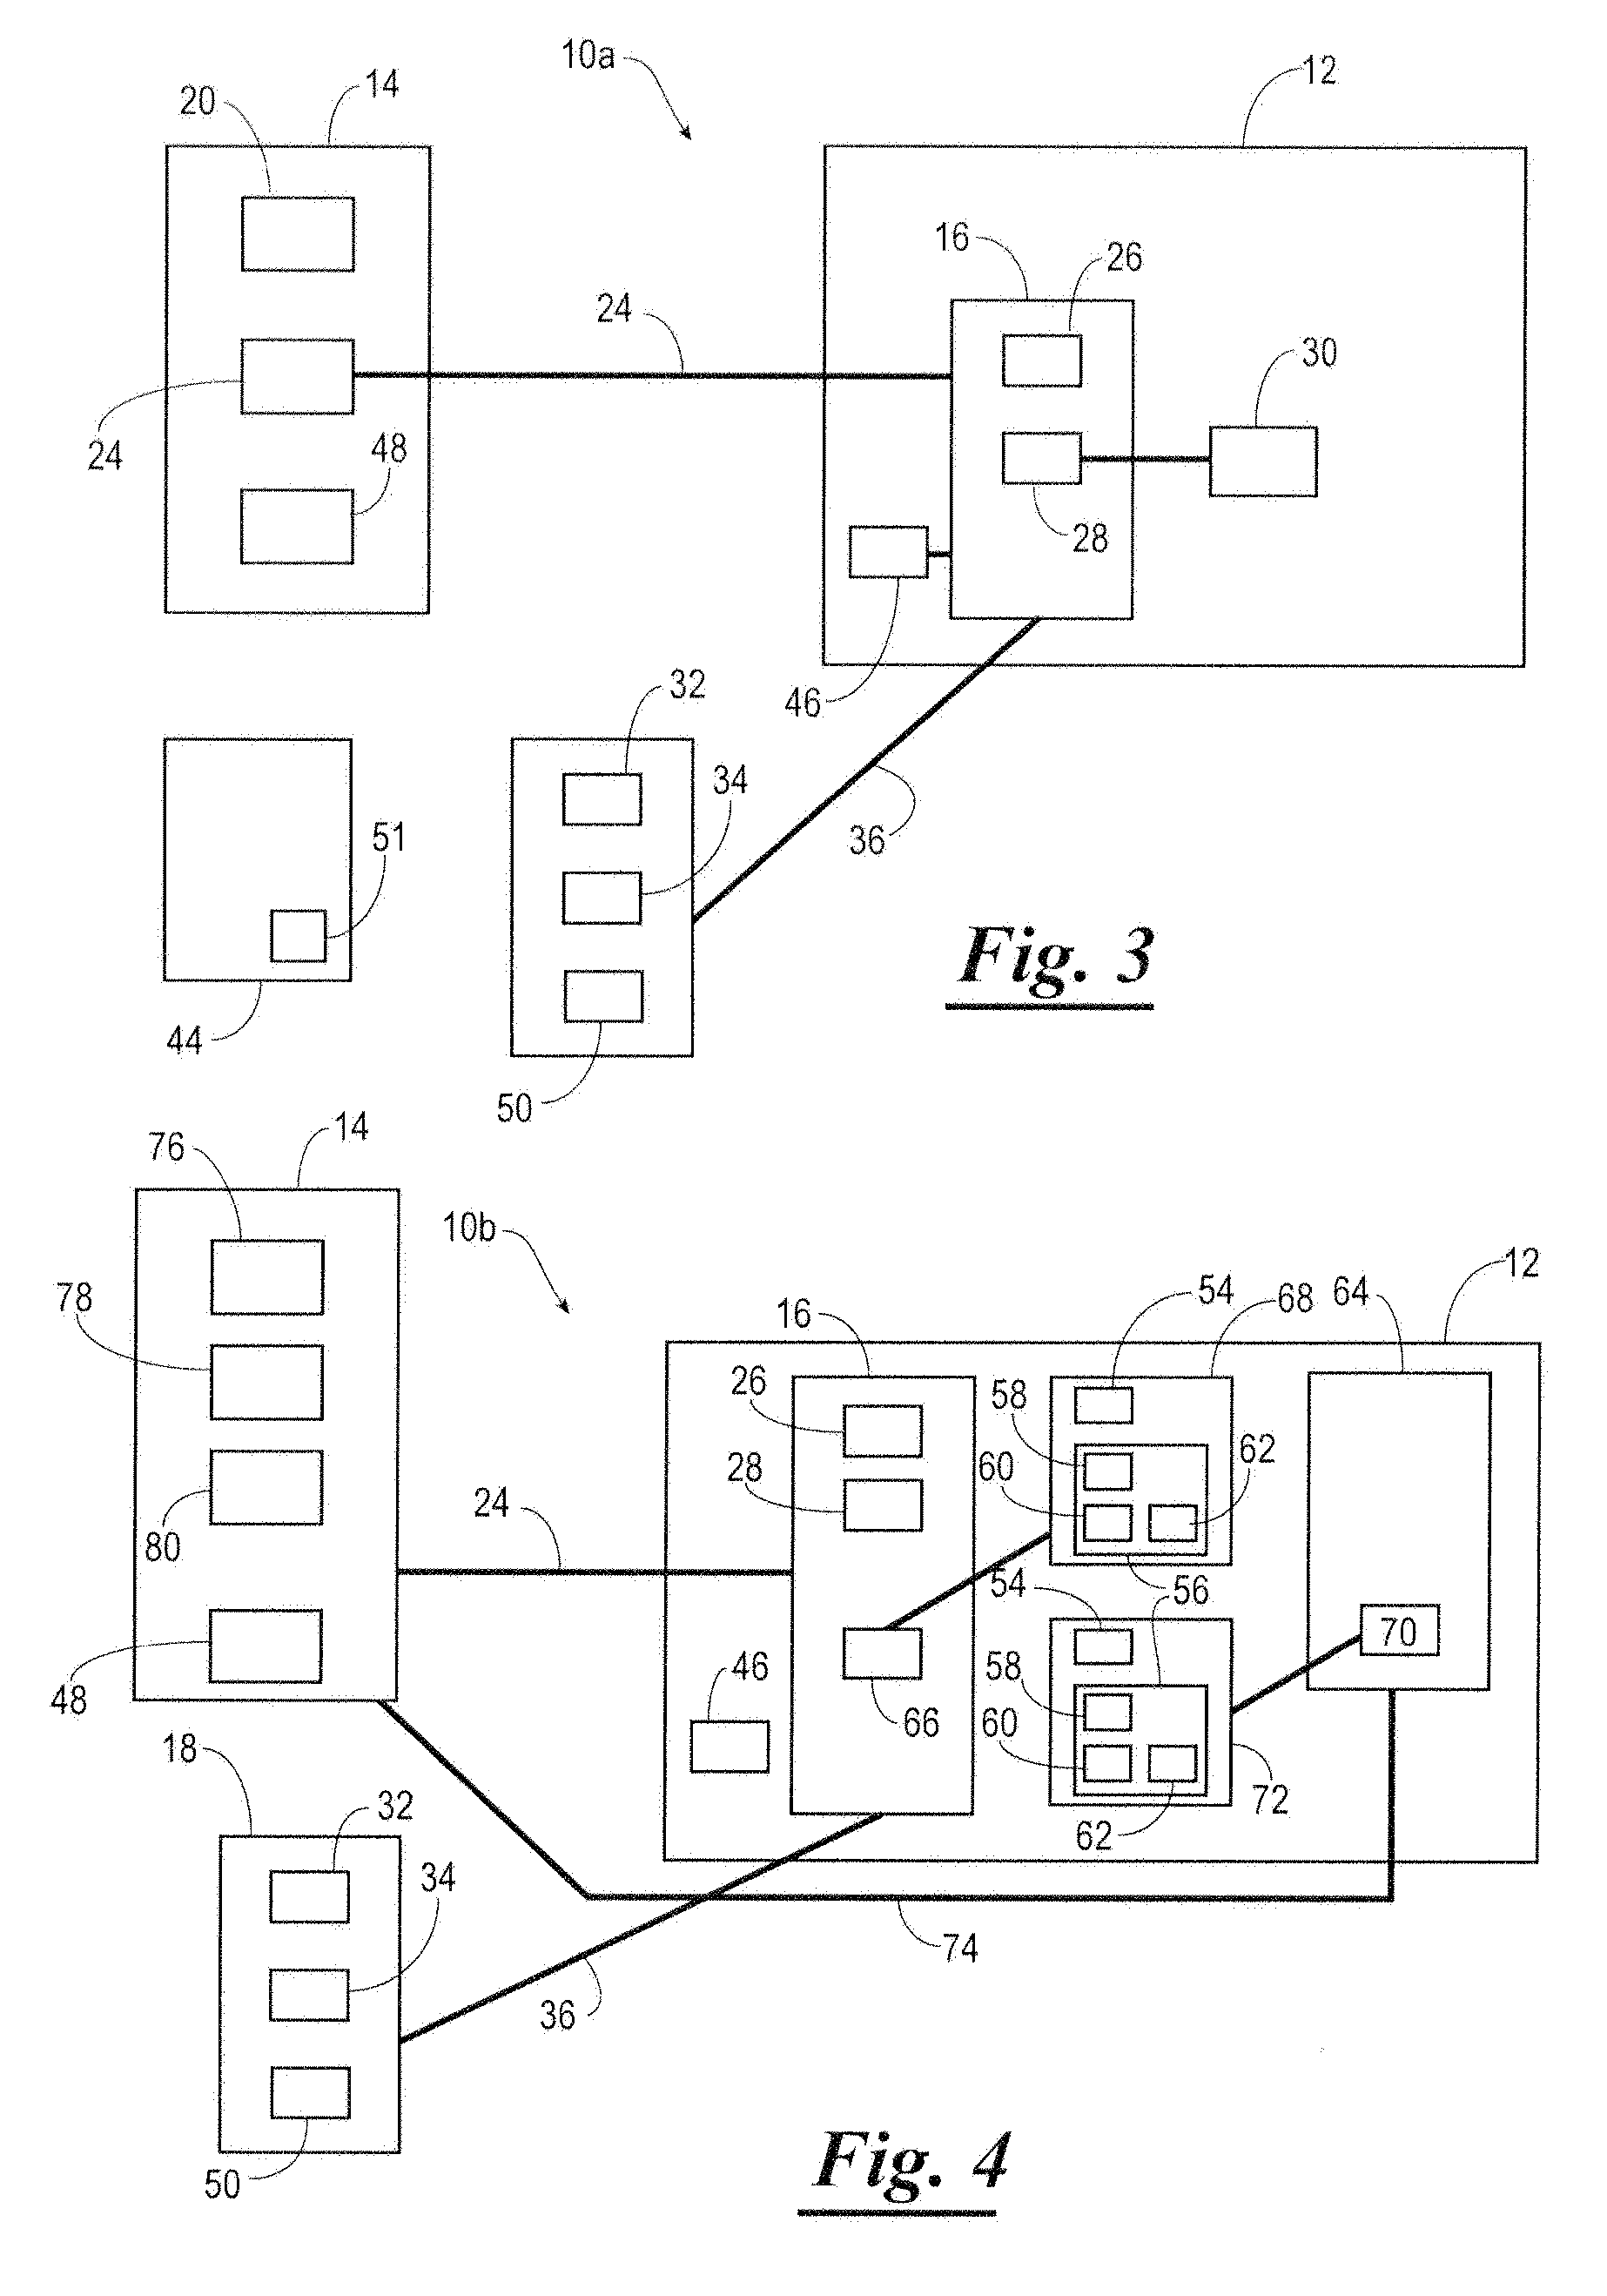 Remote control system having a touchscreen for controlling a railway vehicle